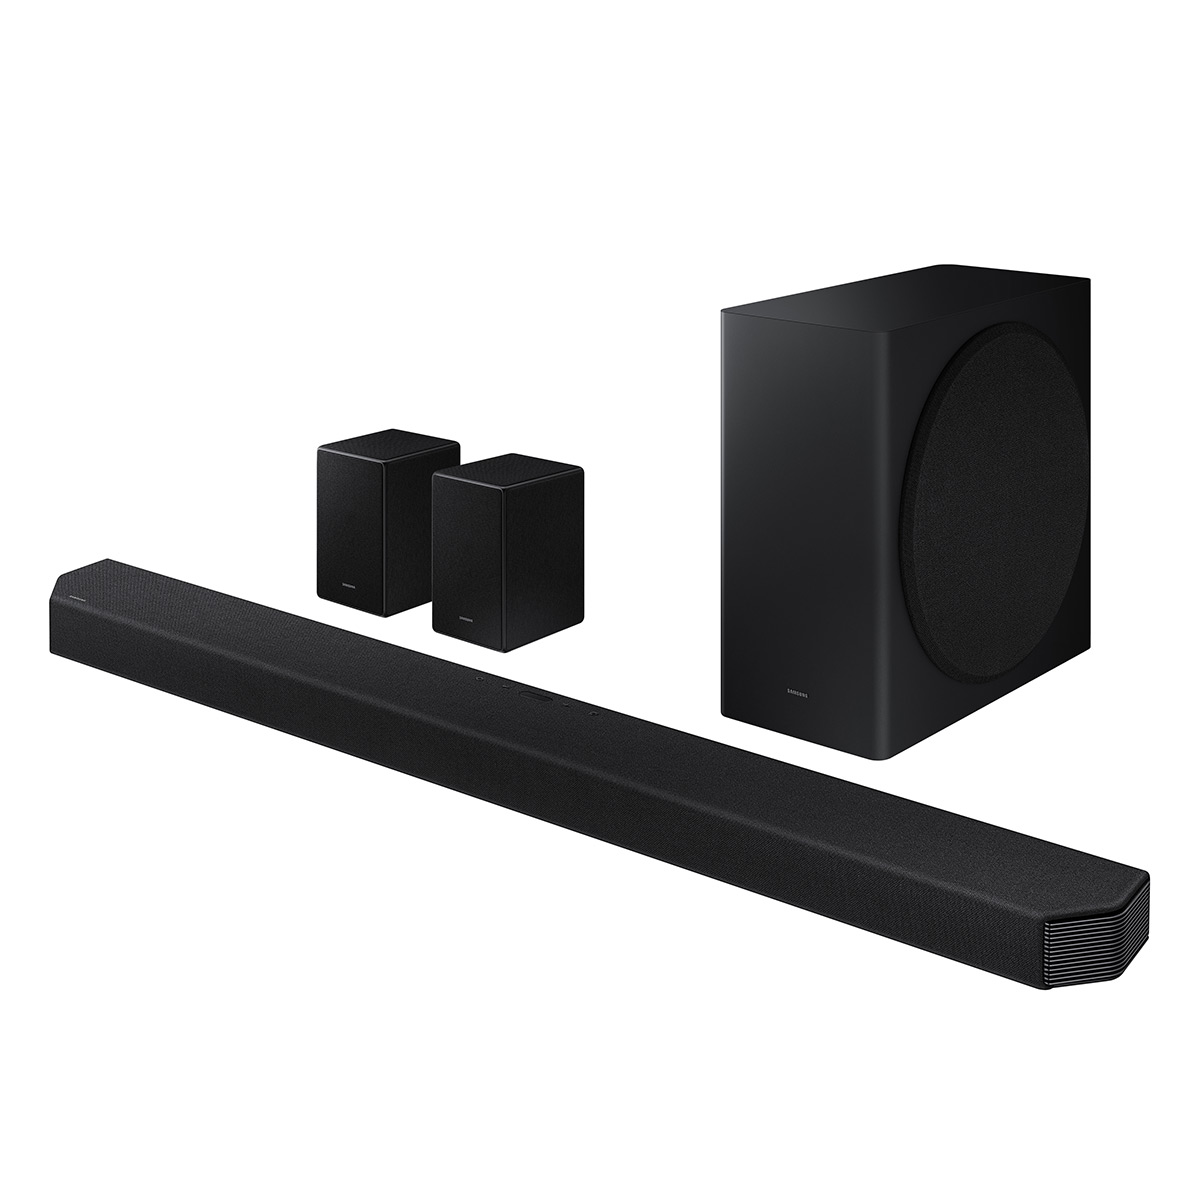 Samsung HW-Q950A 11.1.4ch Soundbar with Dolby Atmos and DTS:X - image 3 of 12